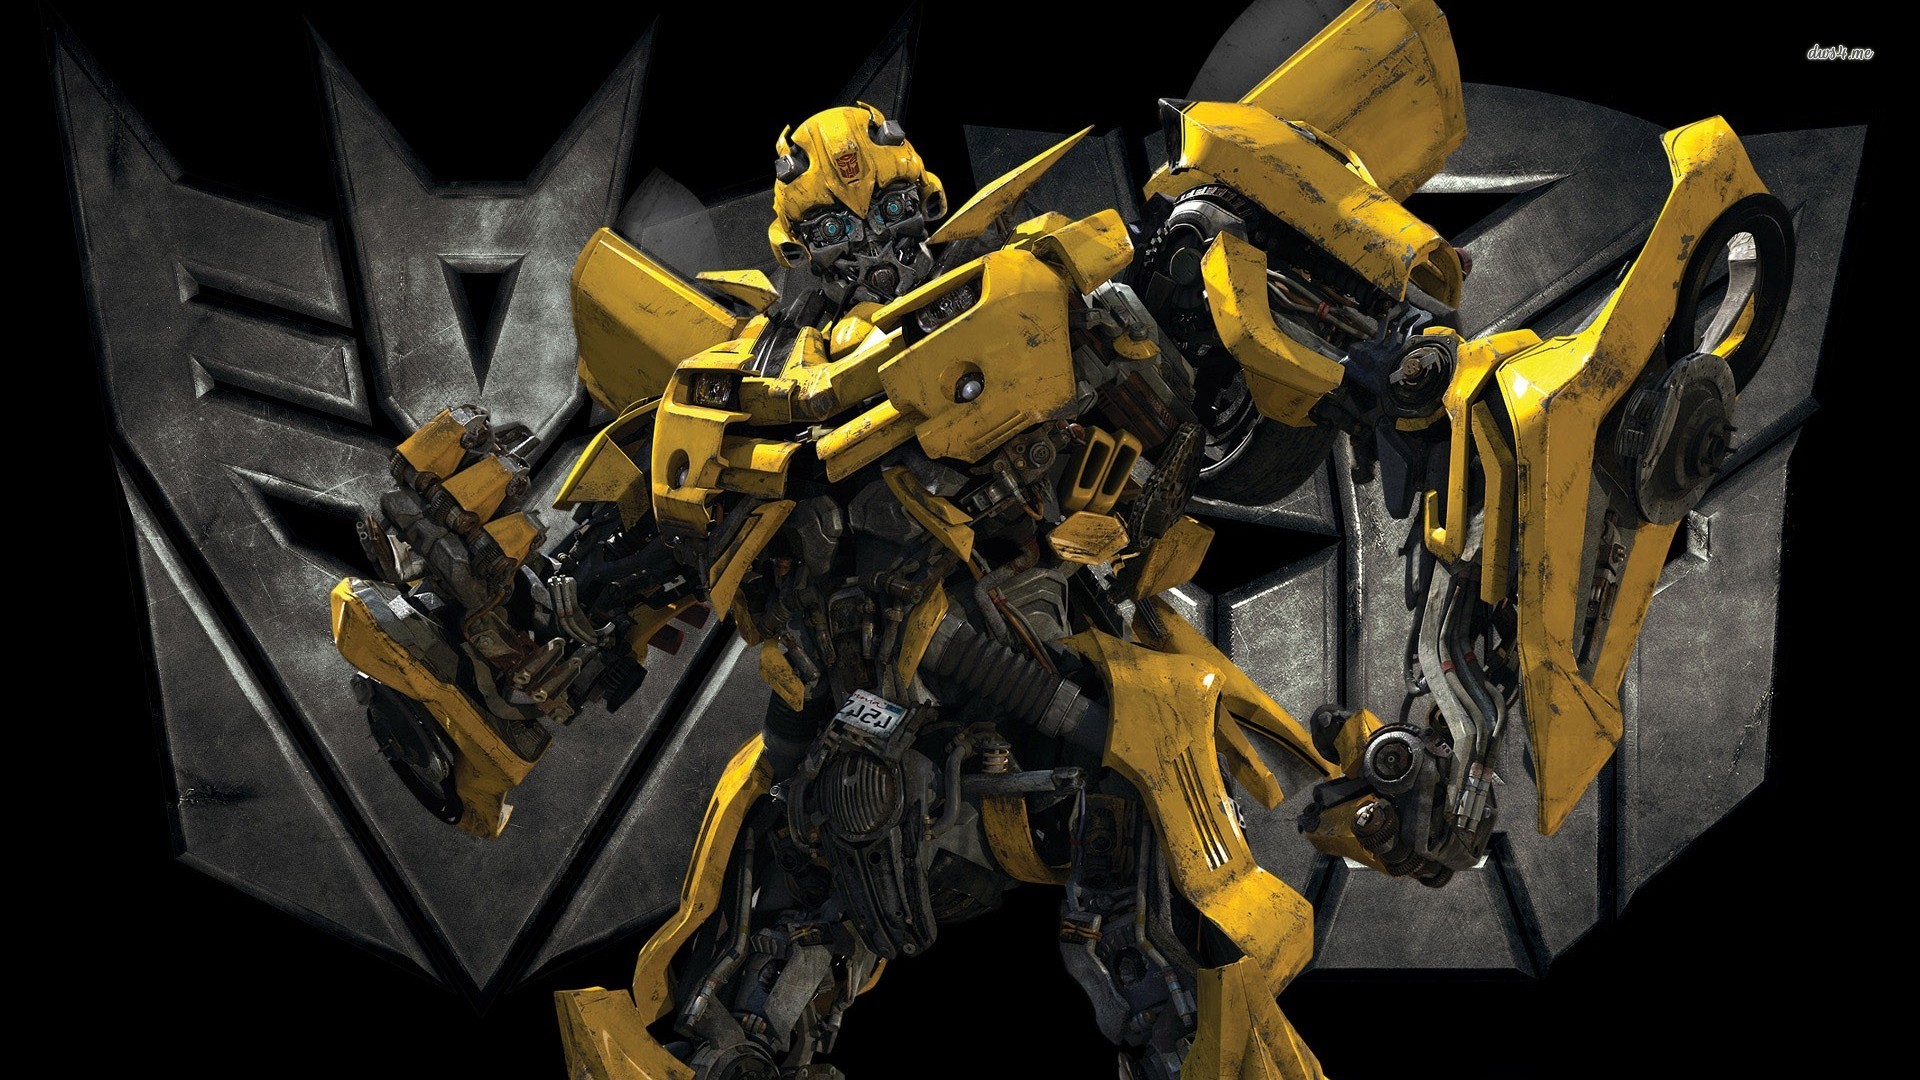 Free download Bumblebee Transformers wallpapers HD free 281237 [1920x1080]  for your Desktop, Mobile & Tablet | Explore 66+ Wallpaper Transformers  Bumblebee | Transformers Bumblebee Wallpapers, Transformer Bumblebee  Wallpaper, Bumblebee Wallpaper